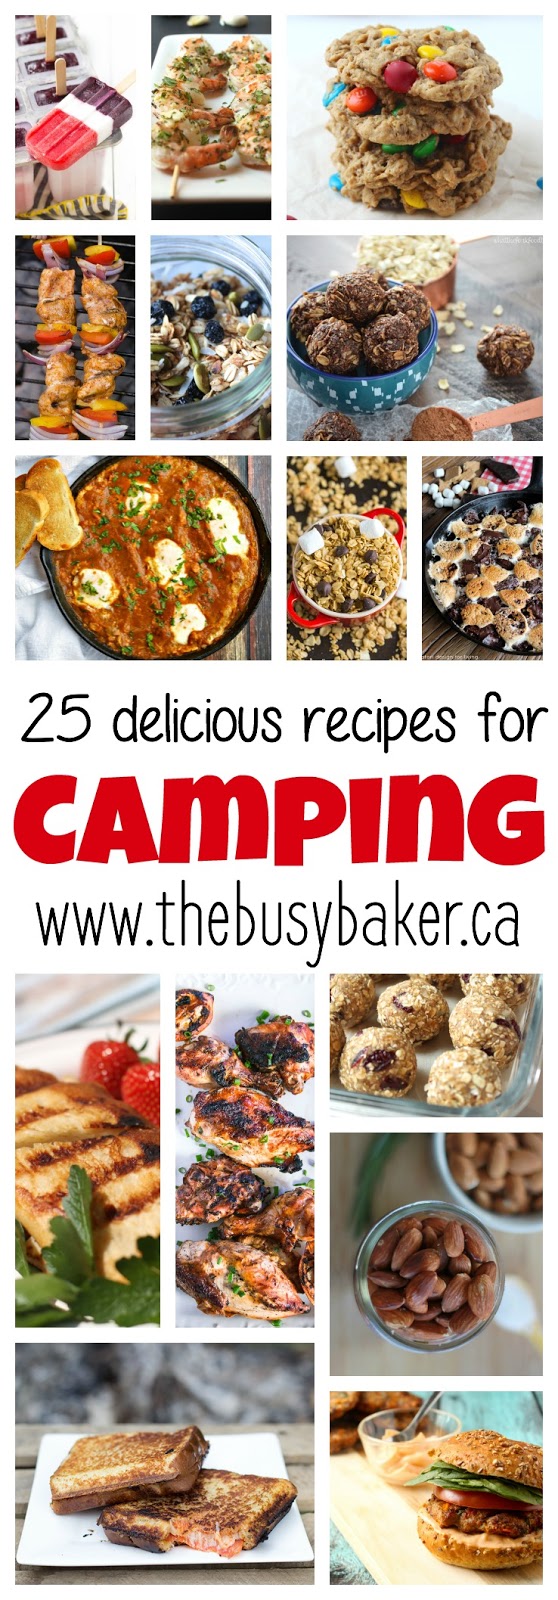 25 Delicious Recipes for Your Next Camping Trip! - The Busy Baker